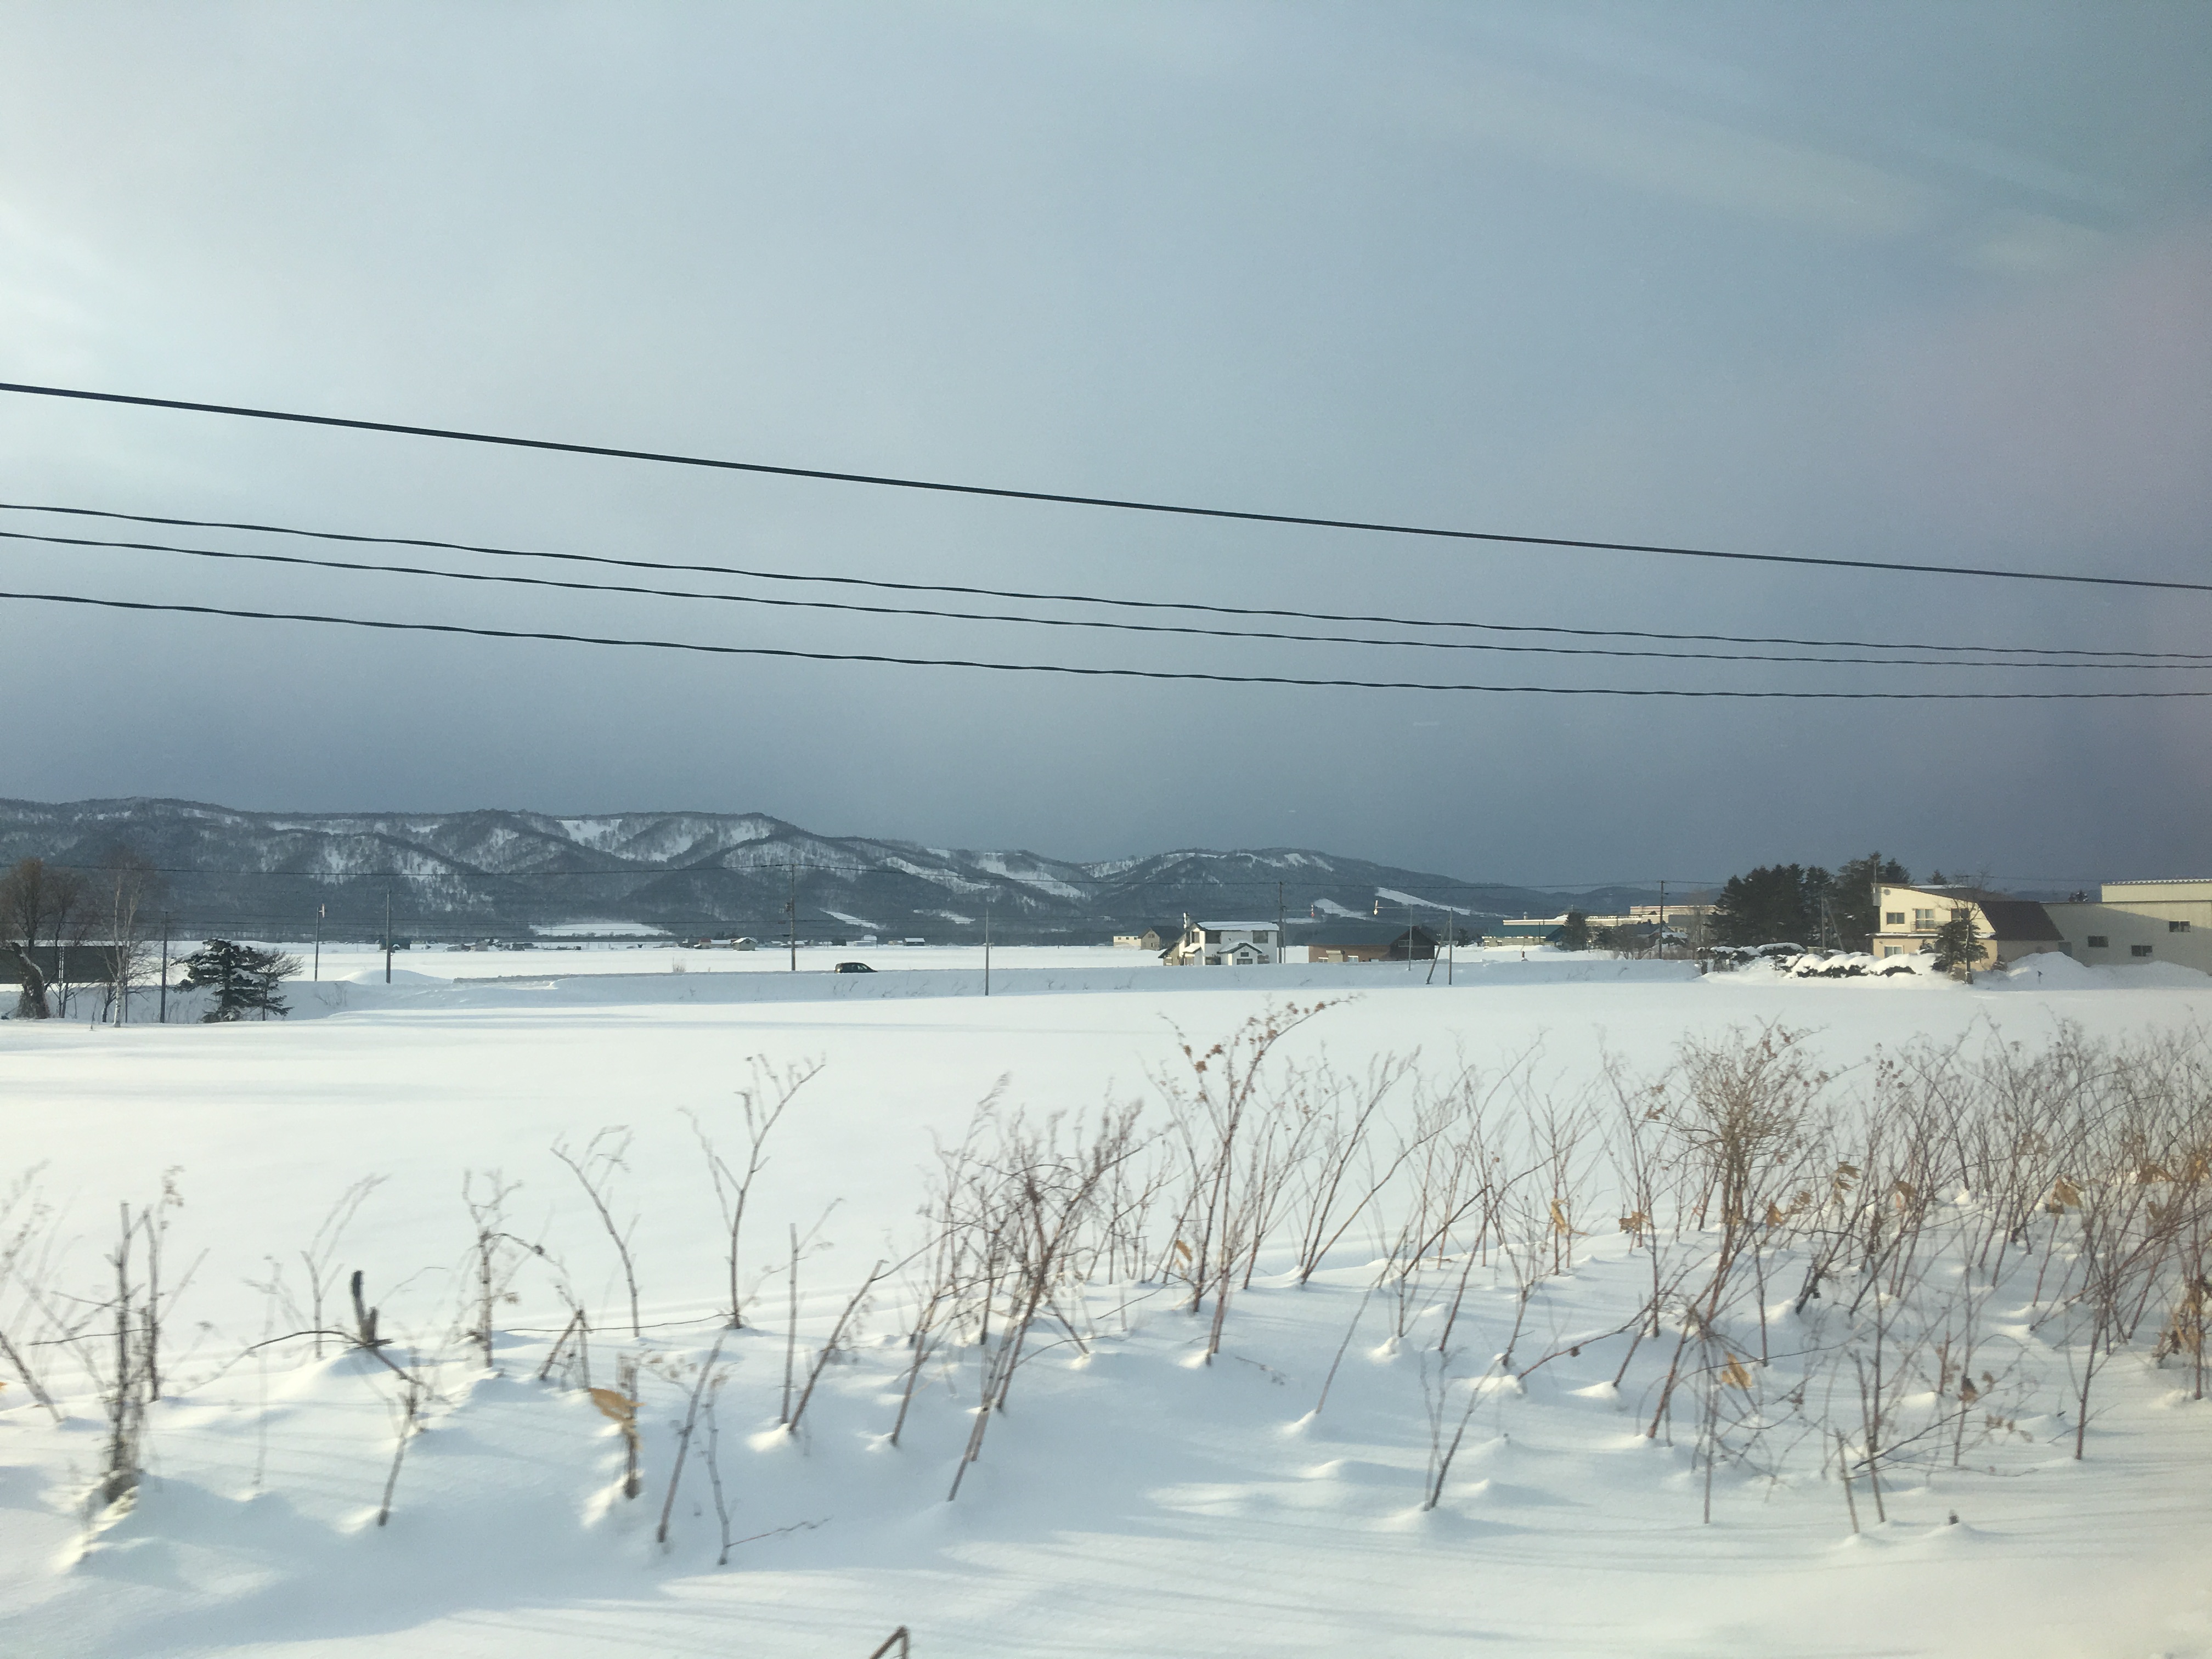 Japan’s northernmost end